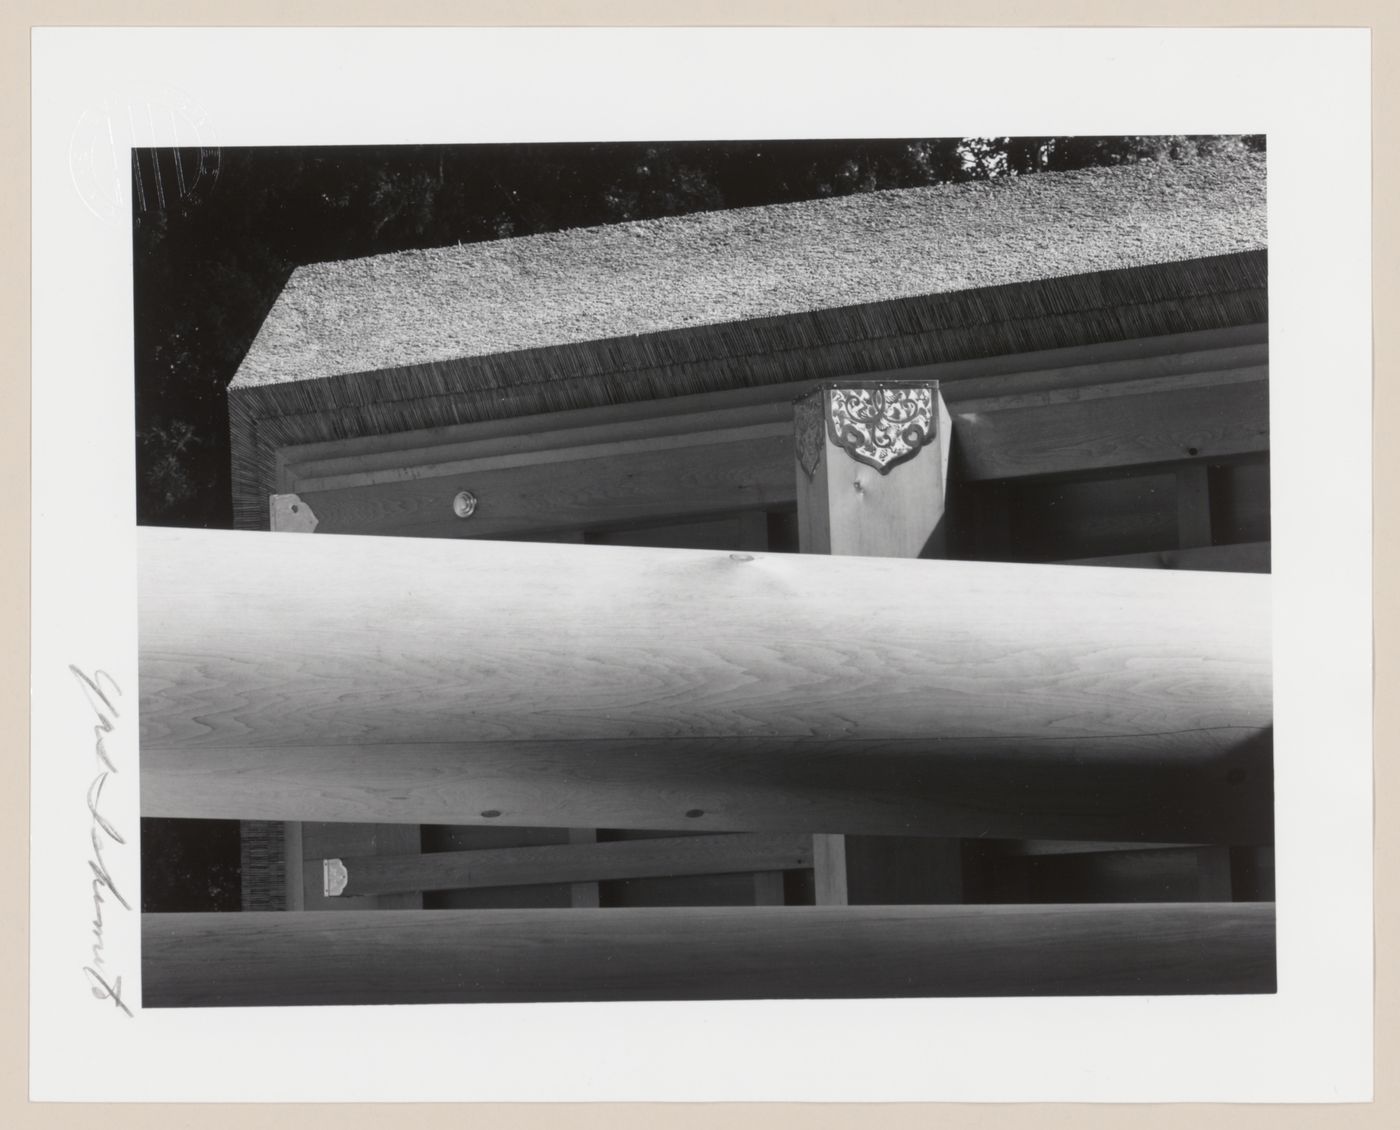 Detail of eaves and a post supporting the ridgeboard of the Shoden [Main Sanctuary], Geku [Outer Shrine], Ise Daijingu (also known as Ise Jingu [Ise Shrine]), Ise-shi, Japan